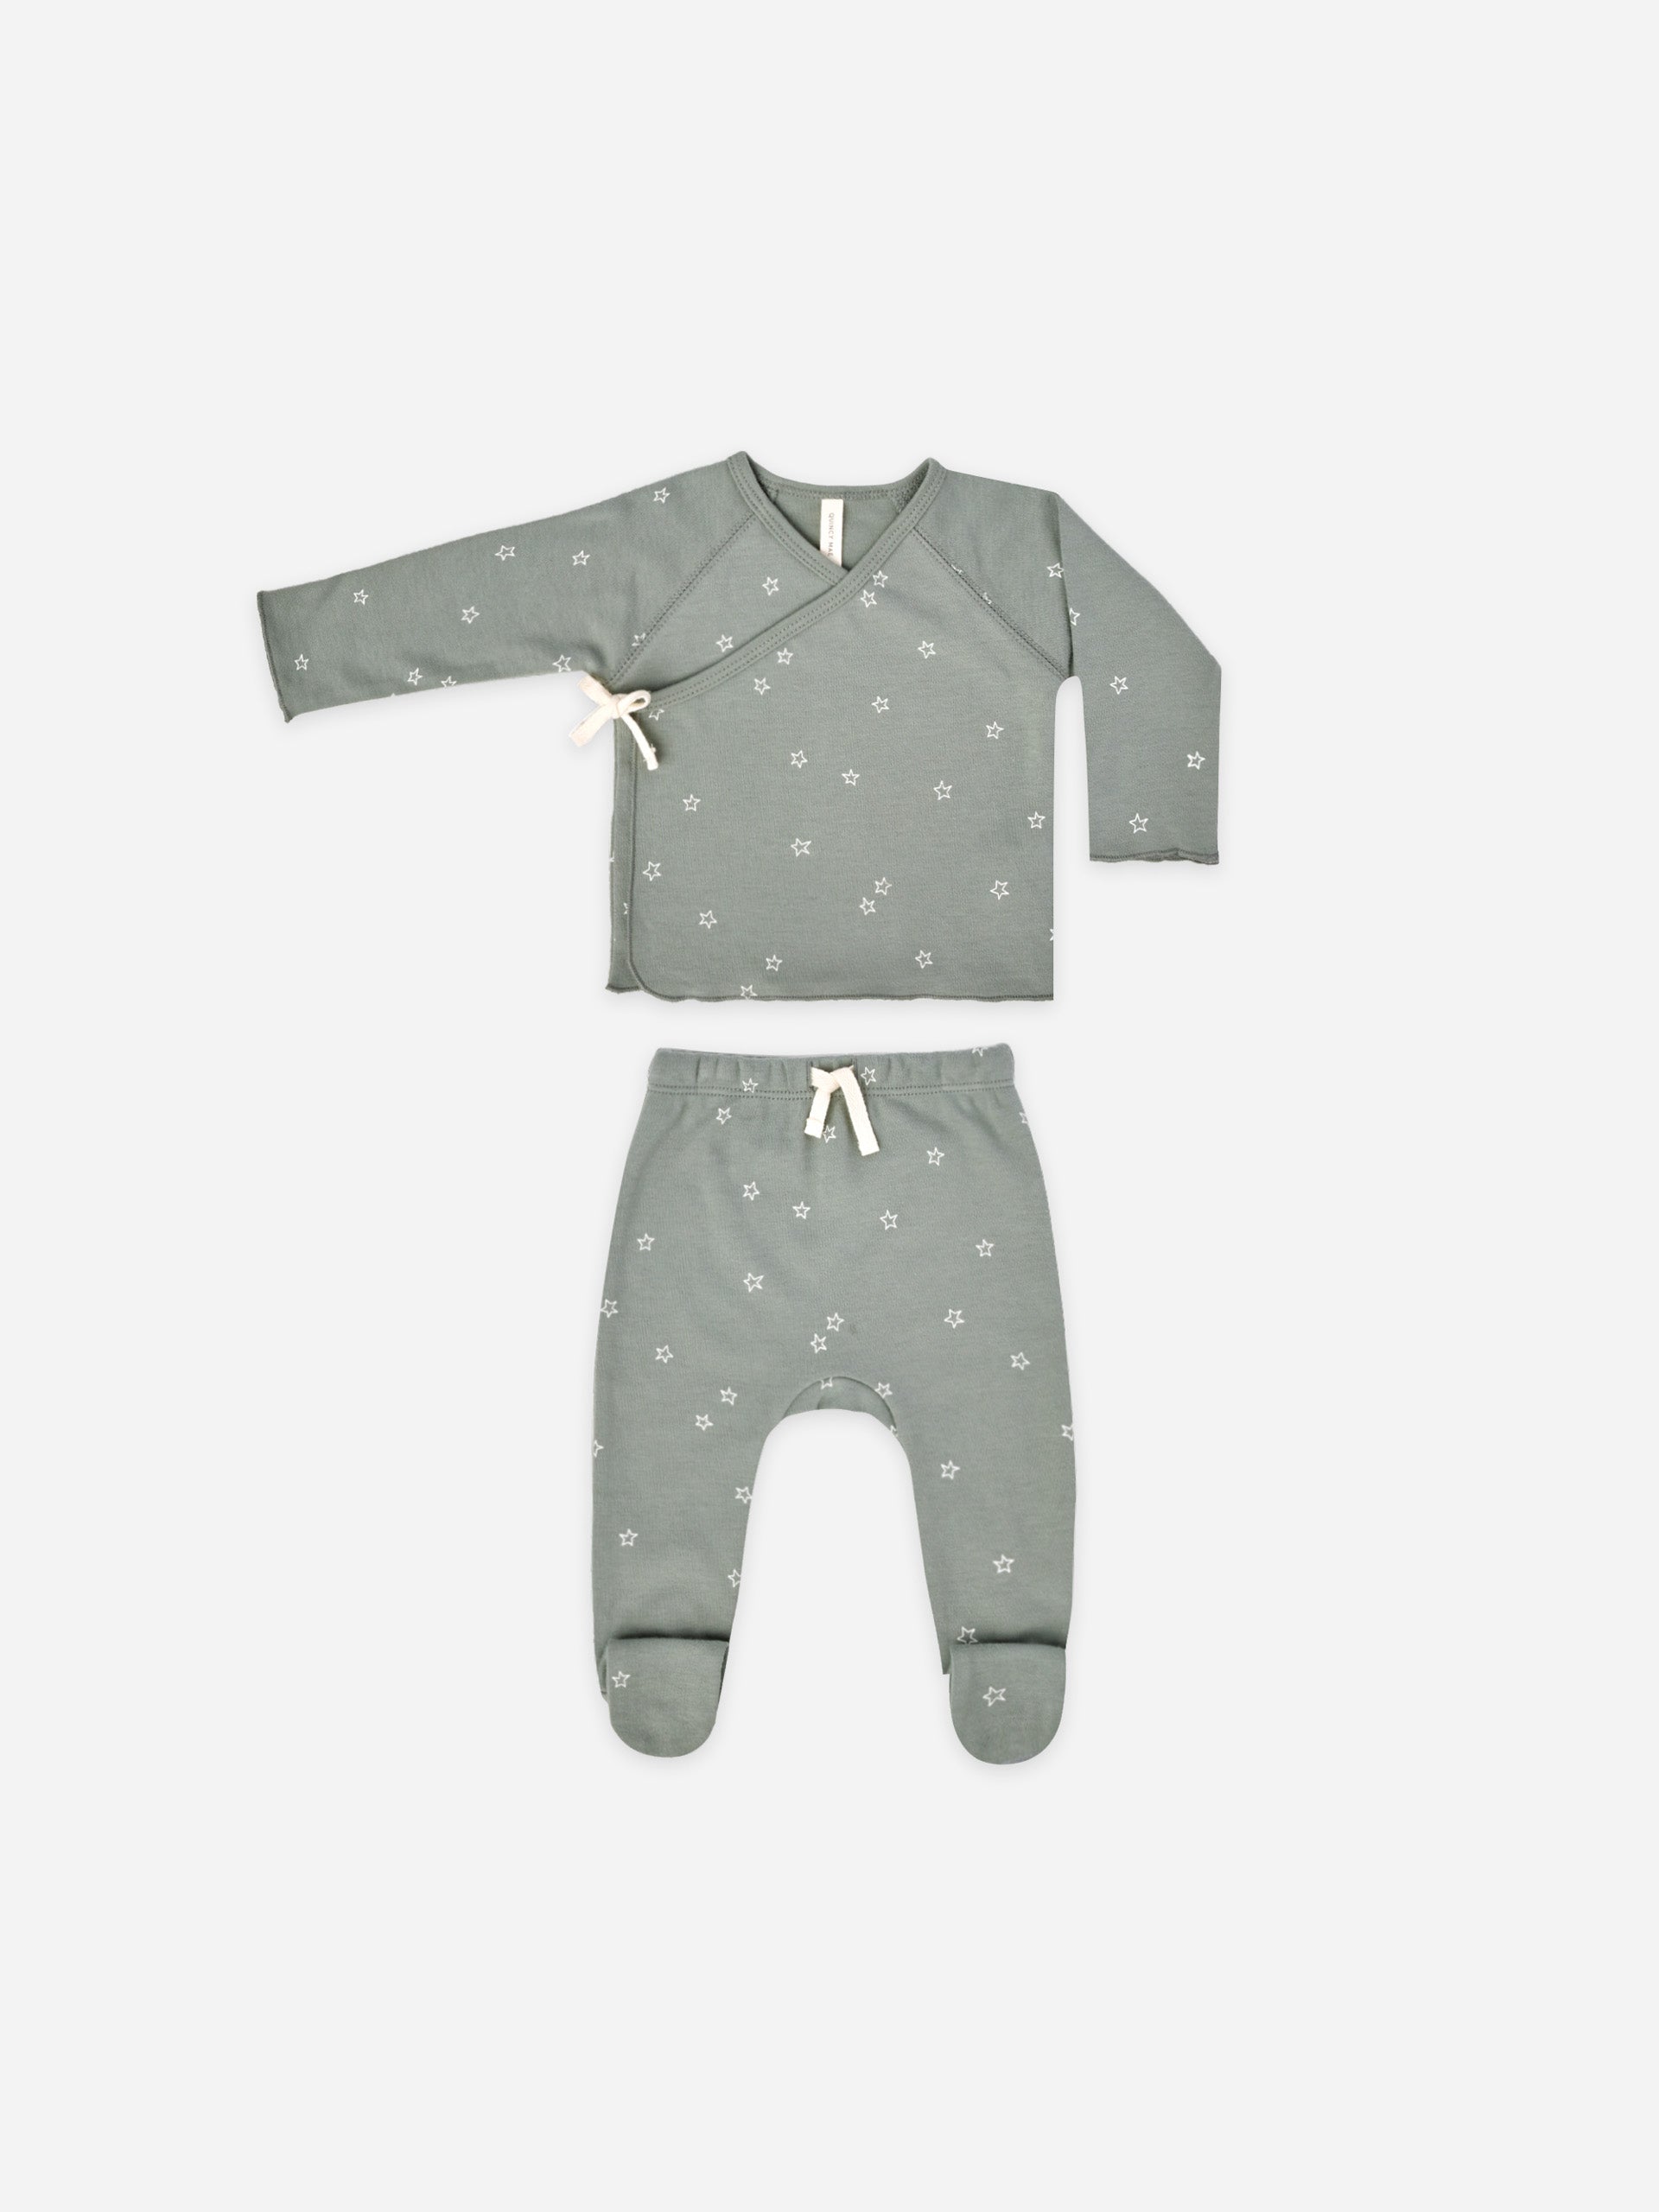 wrap top + pant set | stars - Quincy Mae | Baby Basics | Baby Clothing | Organic Baby Clothes | Modern Baby Boy Clothes |